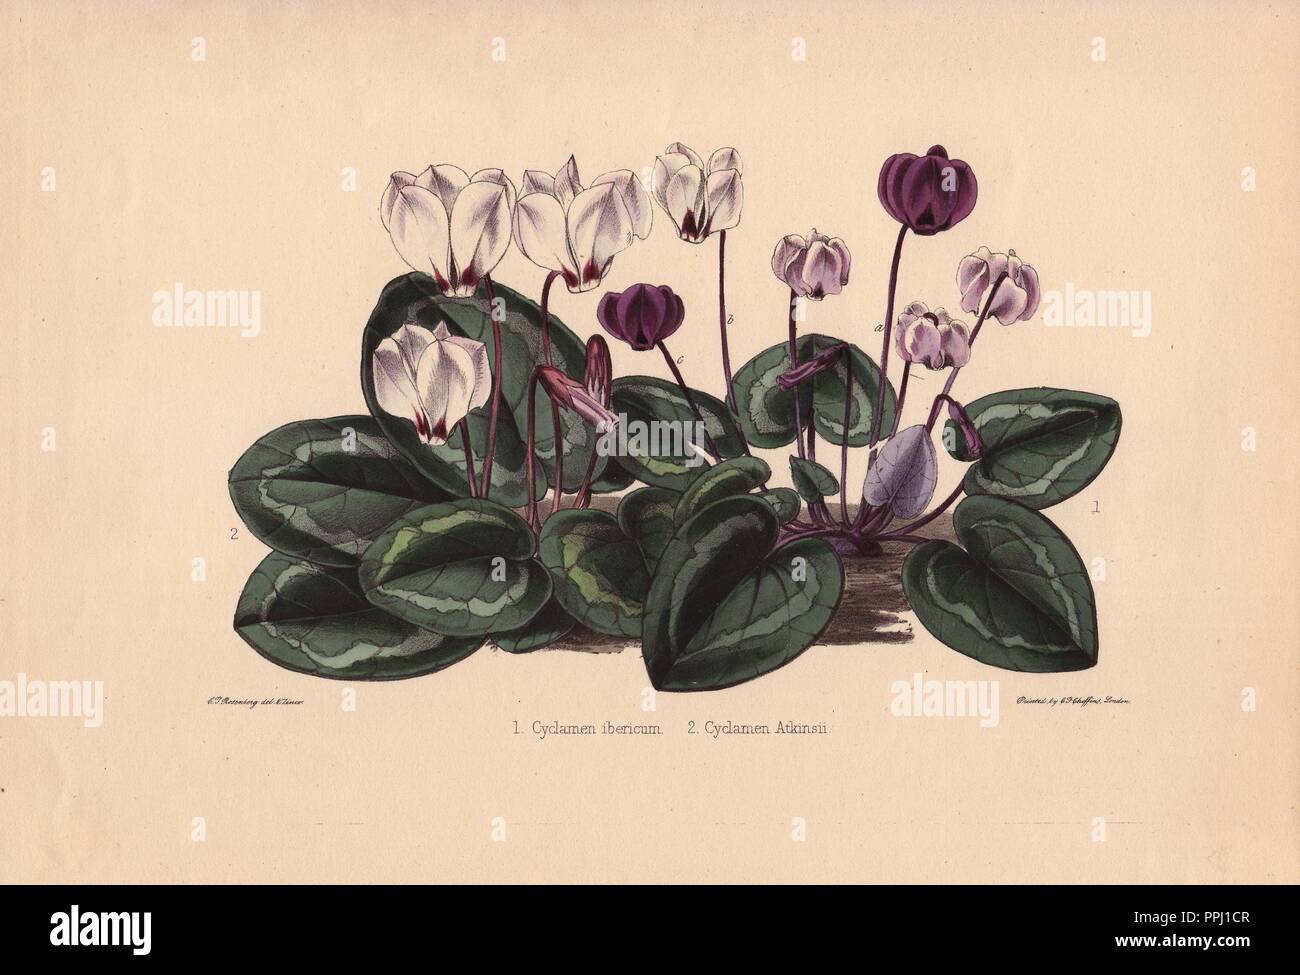 White and purple cyclamens. Cyclamen ibericum and Cyclamen atkinsii. Drawn and zincographed by C. T. Rosenberg, for Thomas Moore's 'The Garden Companion and Florists' Guide,' 1852, published by Charles Frederick Cheffins.. . C.T. Rosenberg drew and engraved many botanicals for Moore's 'The Gardener's Magazine of Botany' and W.J. Hooker's 'Curtis's Botanical Magazine' in the middle of the 19th century. Moore (1821-1887) was the curator of the Botanic Garden, Chelsea, from 1847 until his death. Stock Photo